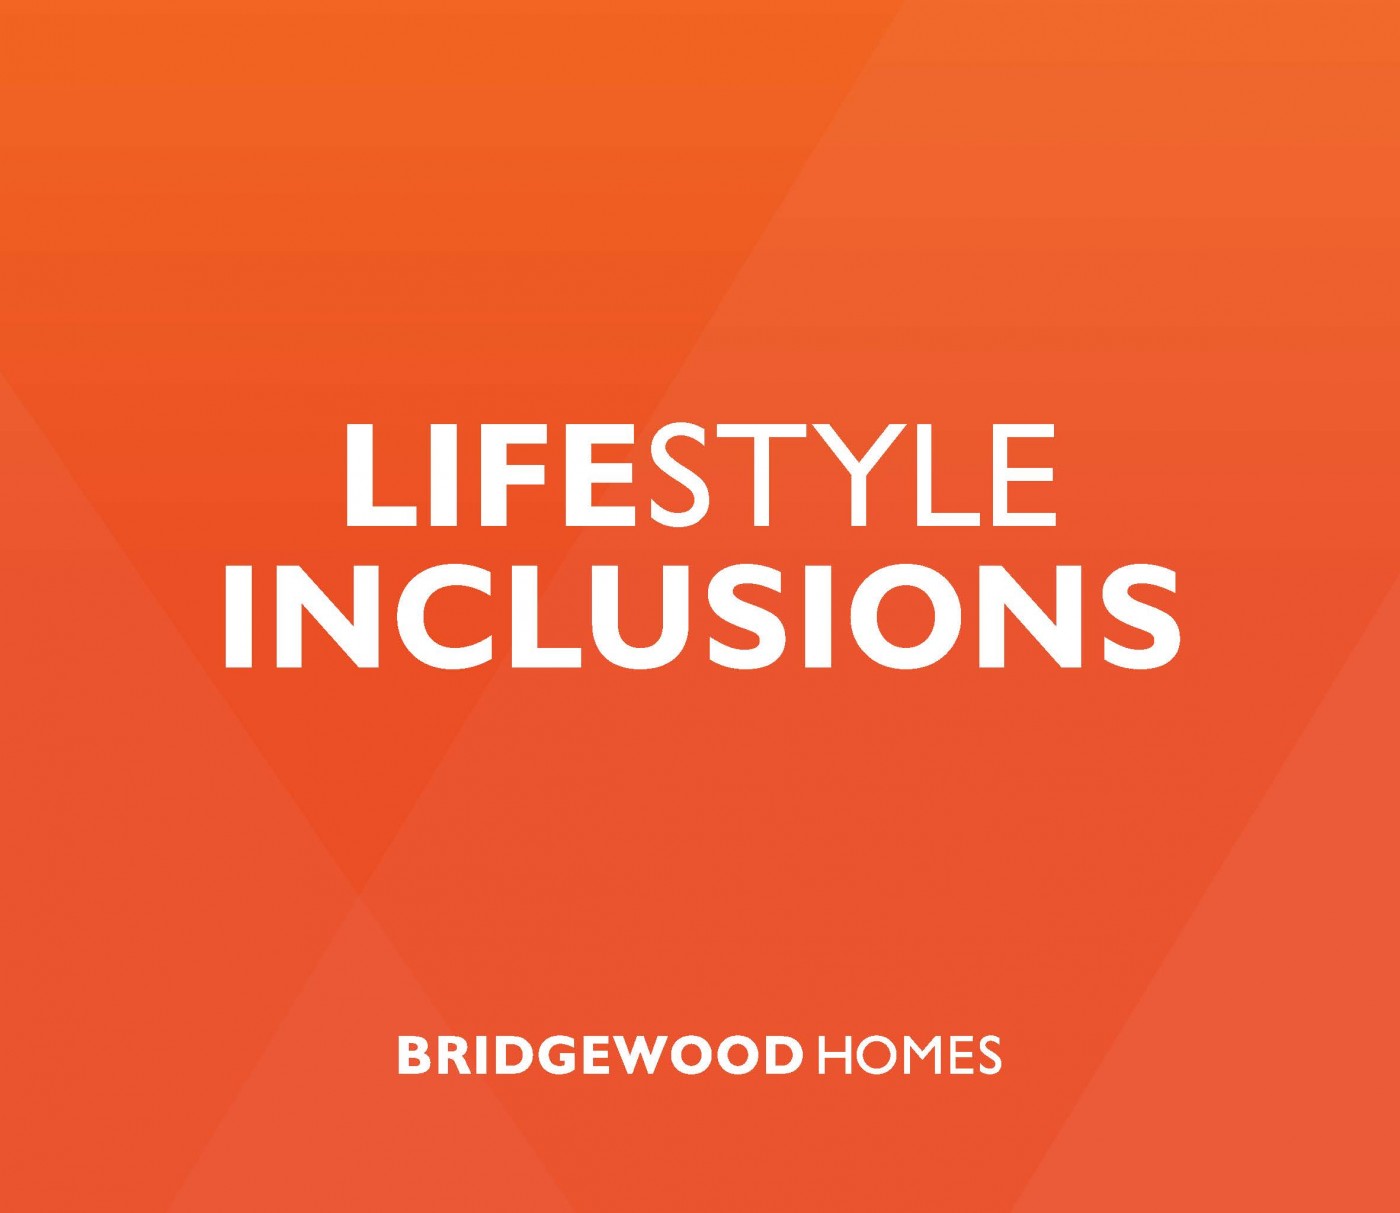 View Our Lifestyle Inclusions